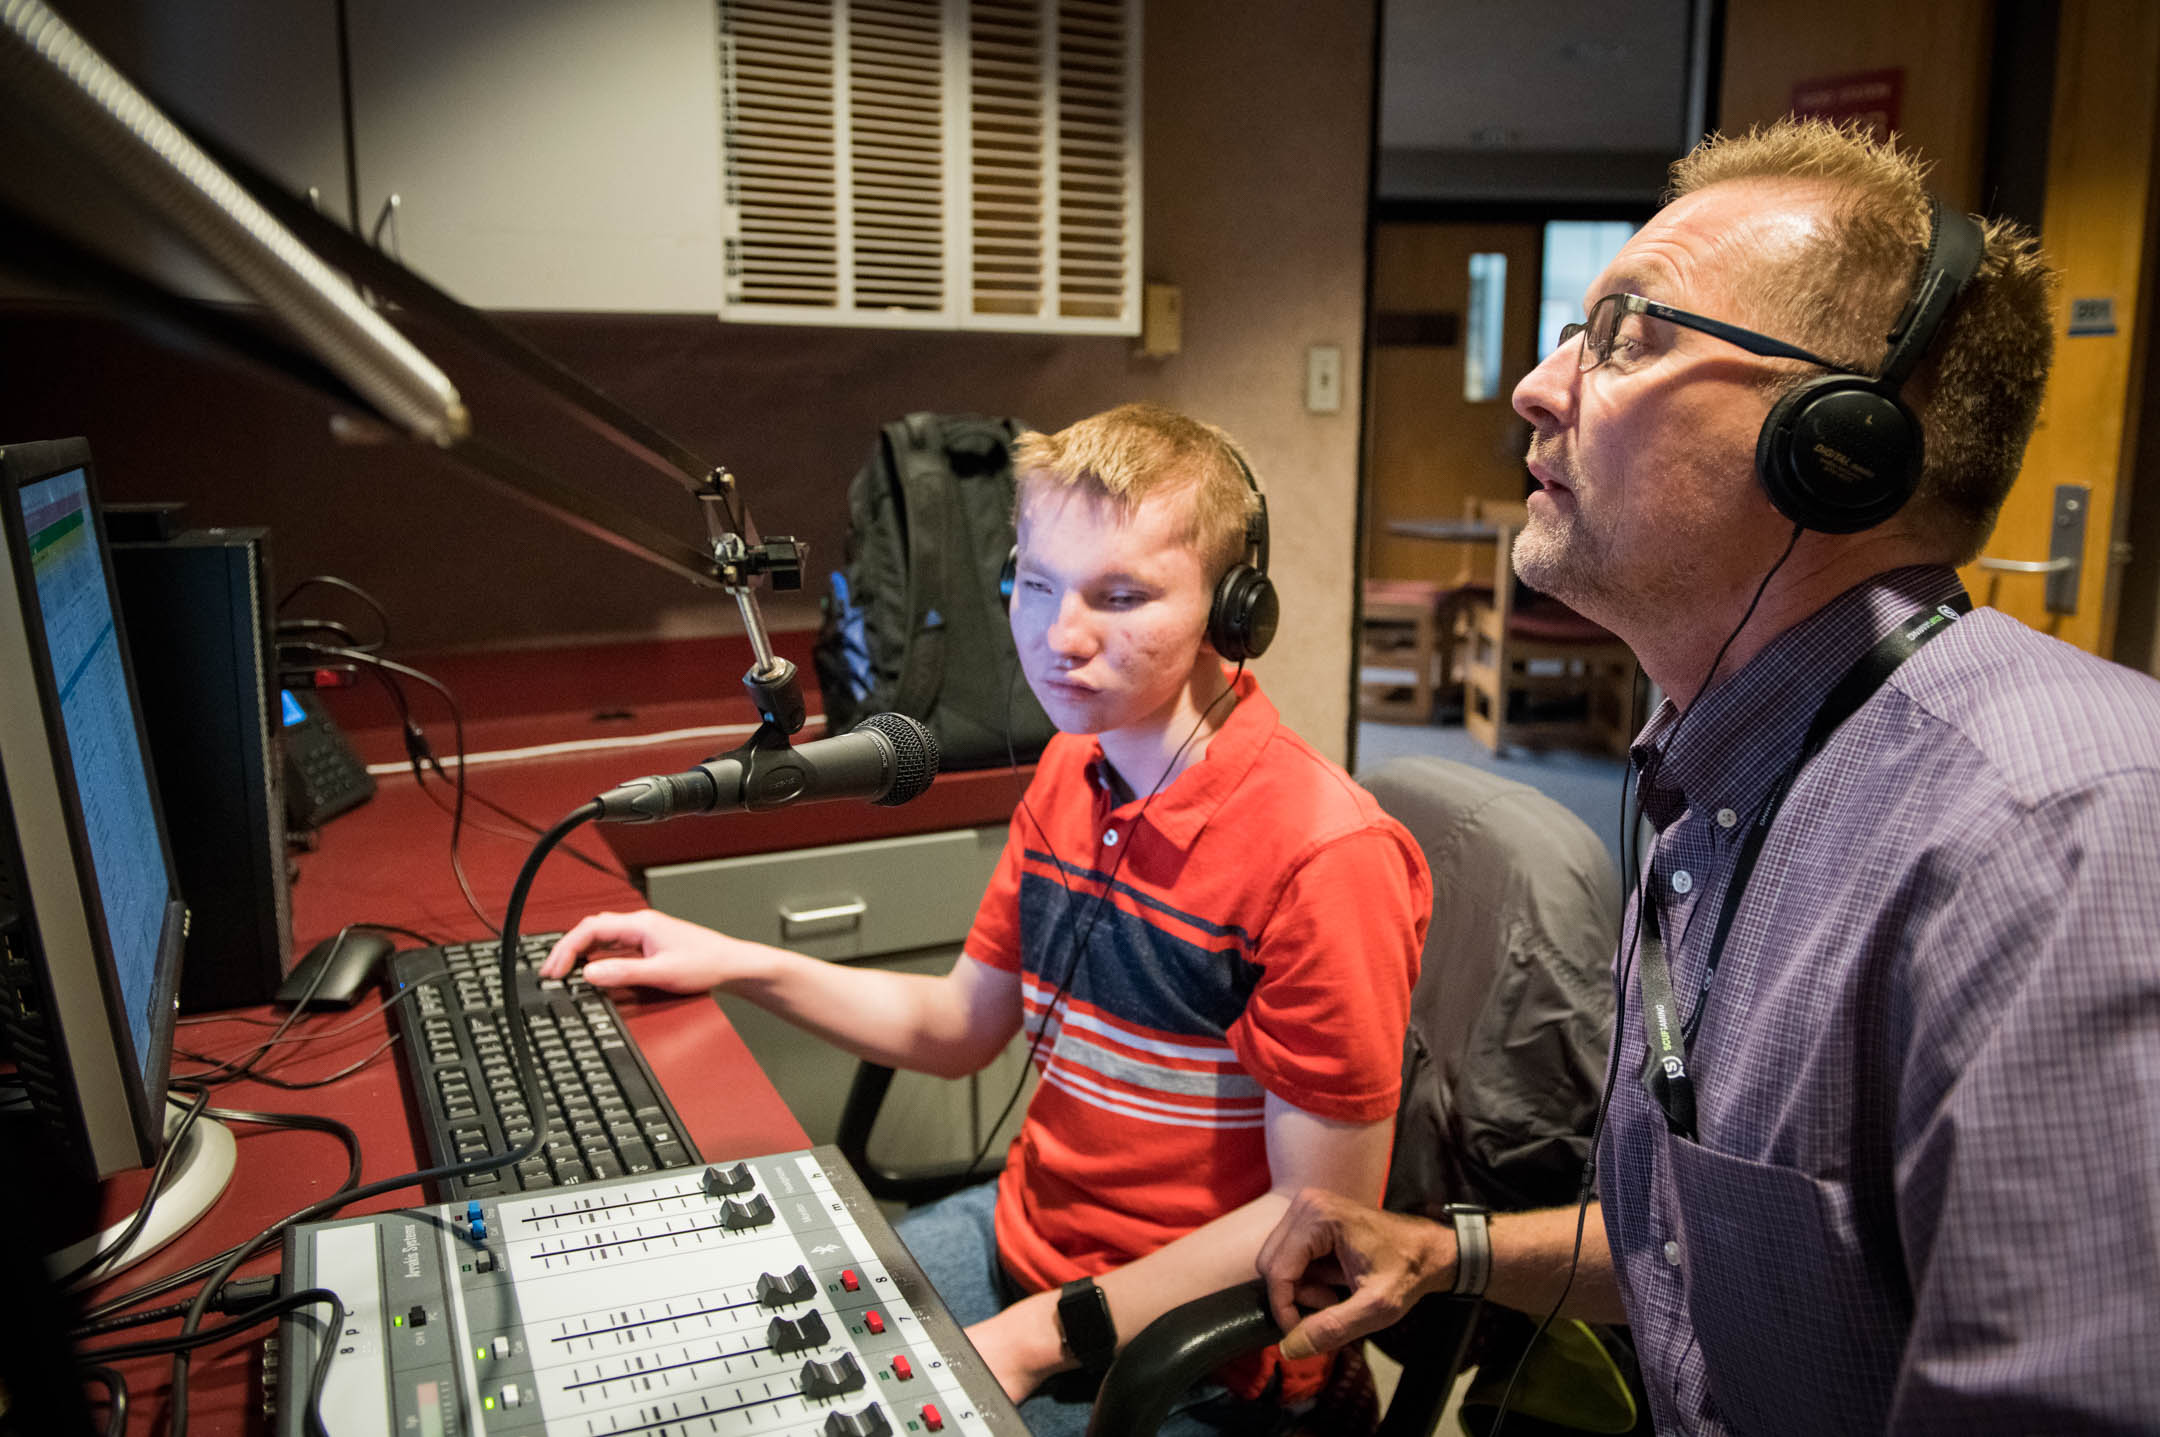 Alex Stine, left, a junior at Kentucky School for the Blind, and Dan Sharrard, the school's career and technical education teacher, man the controls at KSB's internet radio station, which began broadcasting earlier this spring. The station is an extension of the school's CTE program that allows students to develop skills they can use after they leave high school. Photo by Bobby Ellis, May 21, 2018